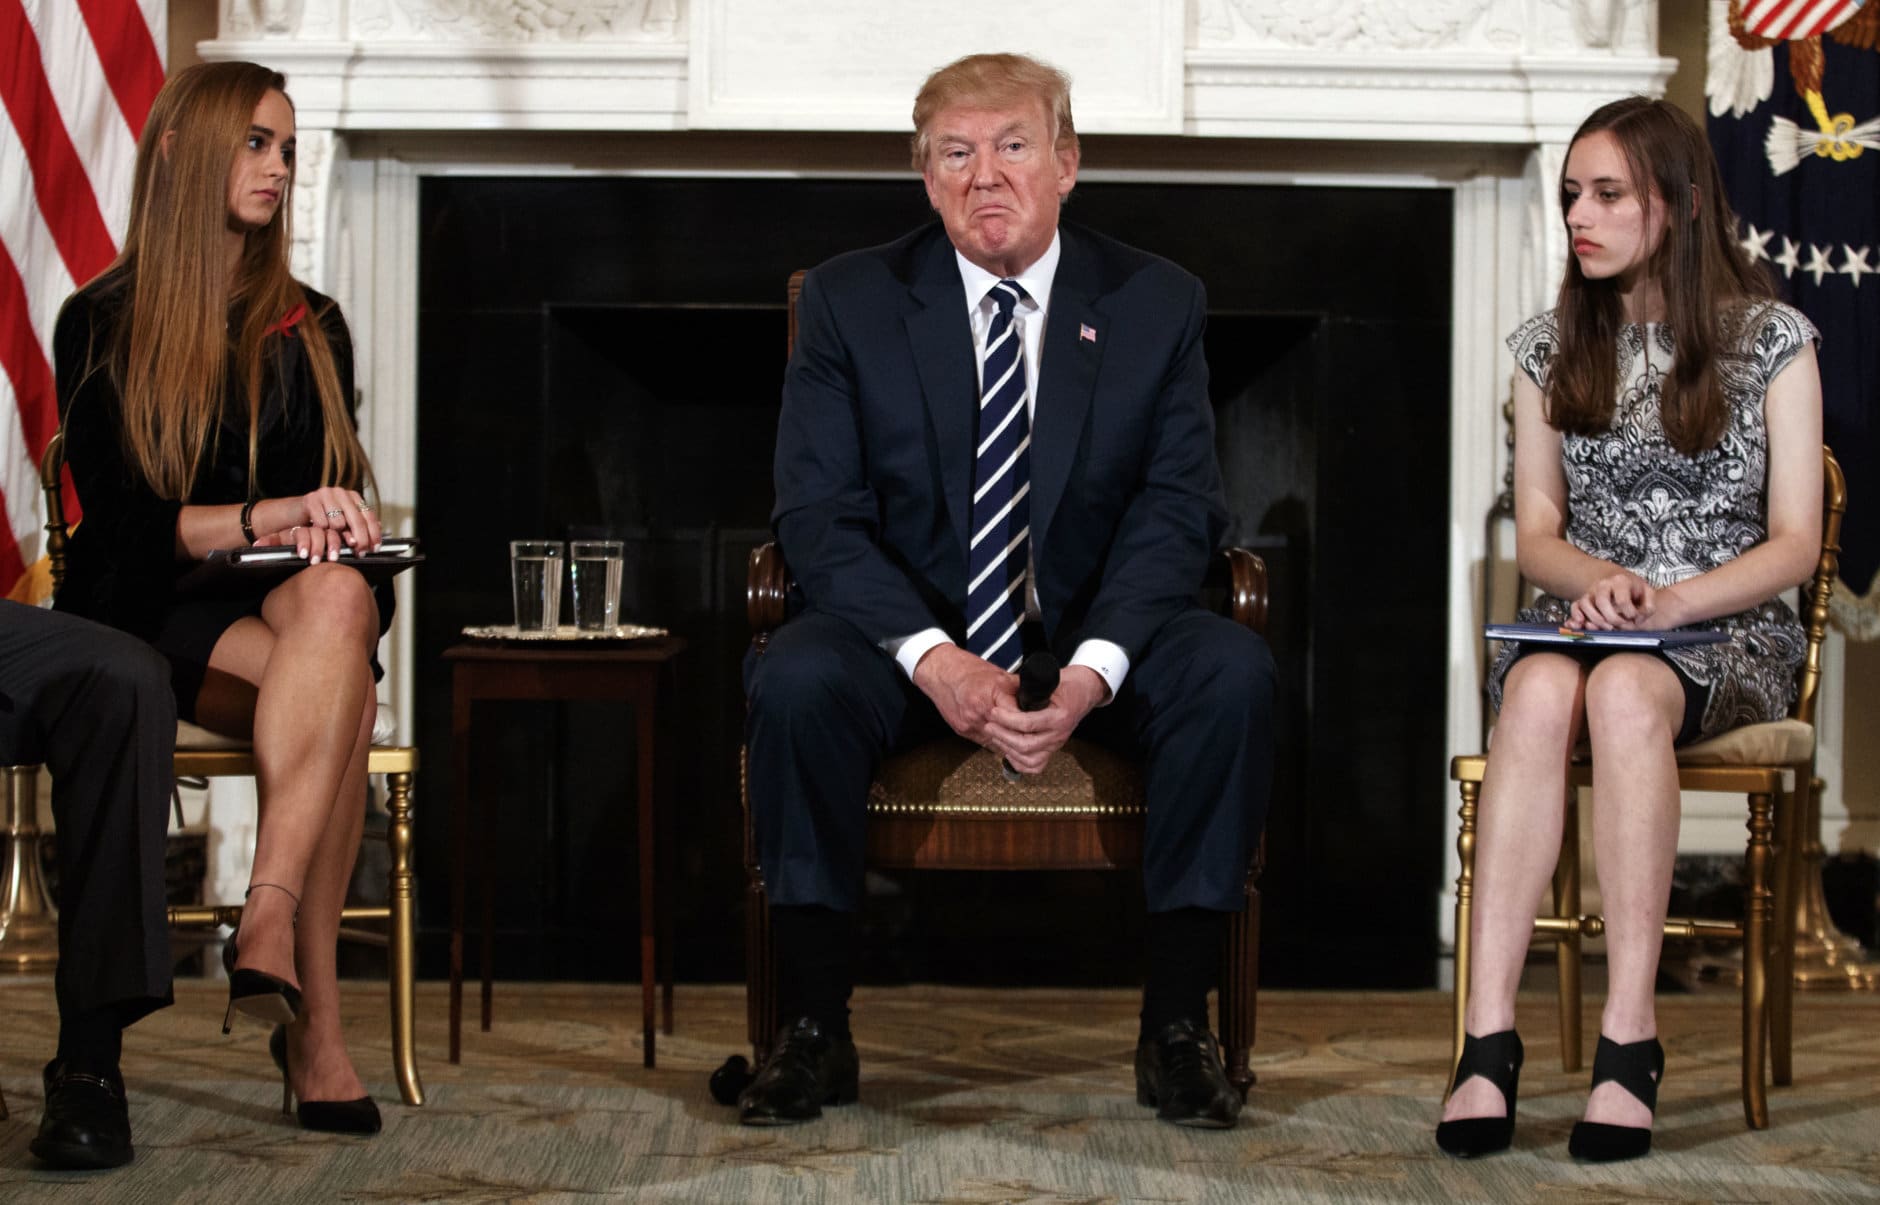 President Donald Trump, joined by Marjory Stoneman Douglas High School student Carson Abt, right, and Julia Cordover, the school's student body president, pauses during a listening session with high school students, teachers and others at the White House in Washington on Feb. 21, 2018, a week after a gunman massacred 17 people at the Florida high school. (AP Photo/Carolyn Kaster)